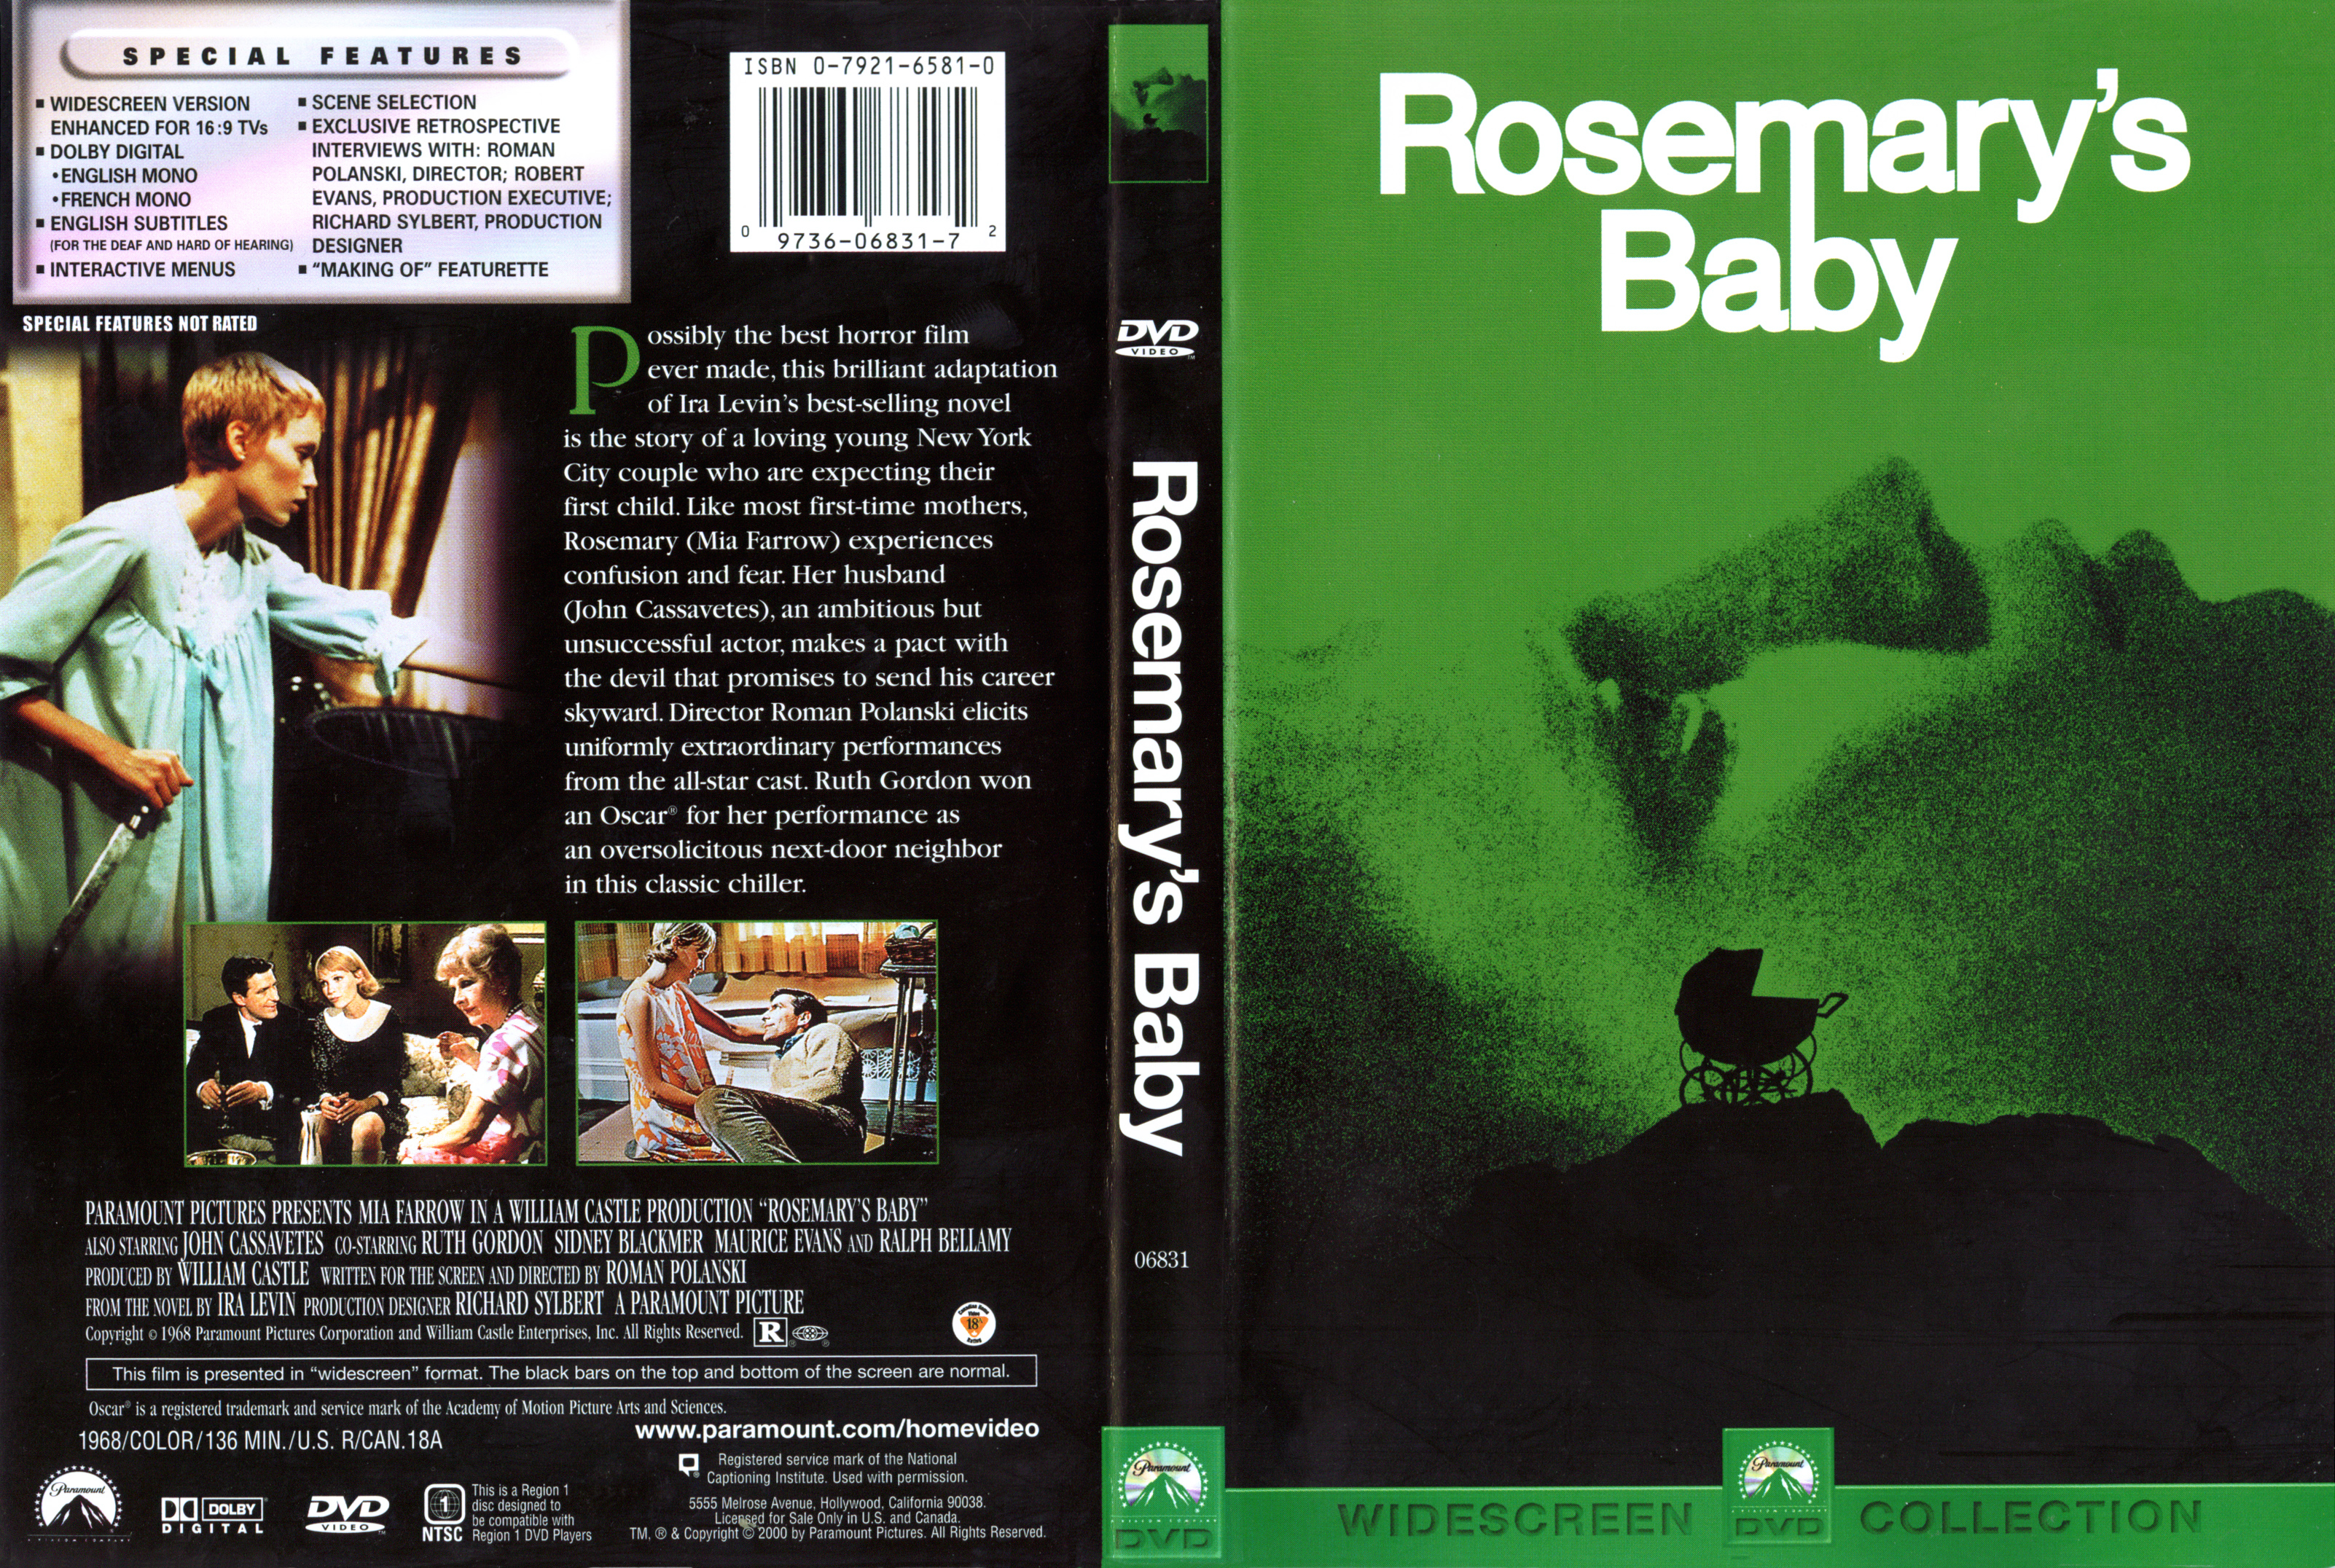 High Resolution Wallpaper | Rosemary's Baby (1968) 3204x2152 px